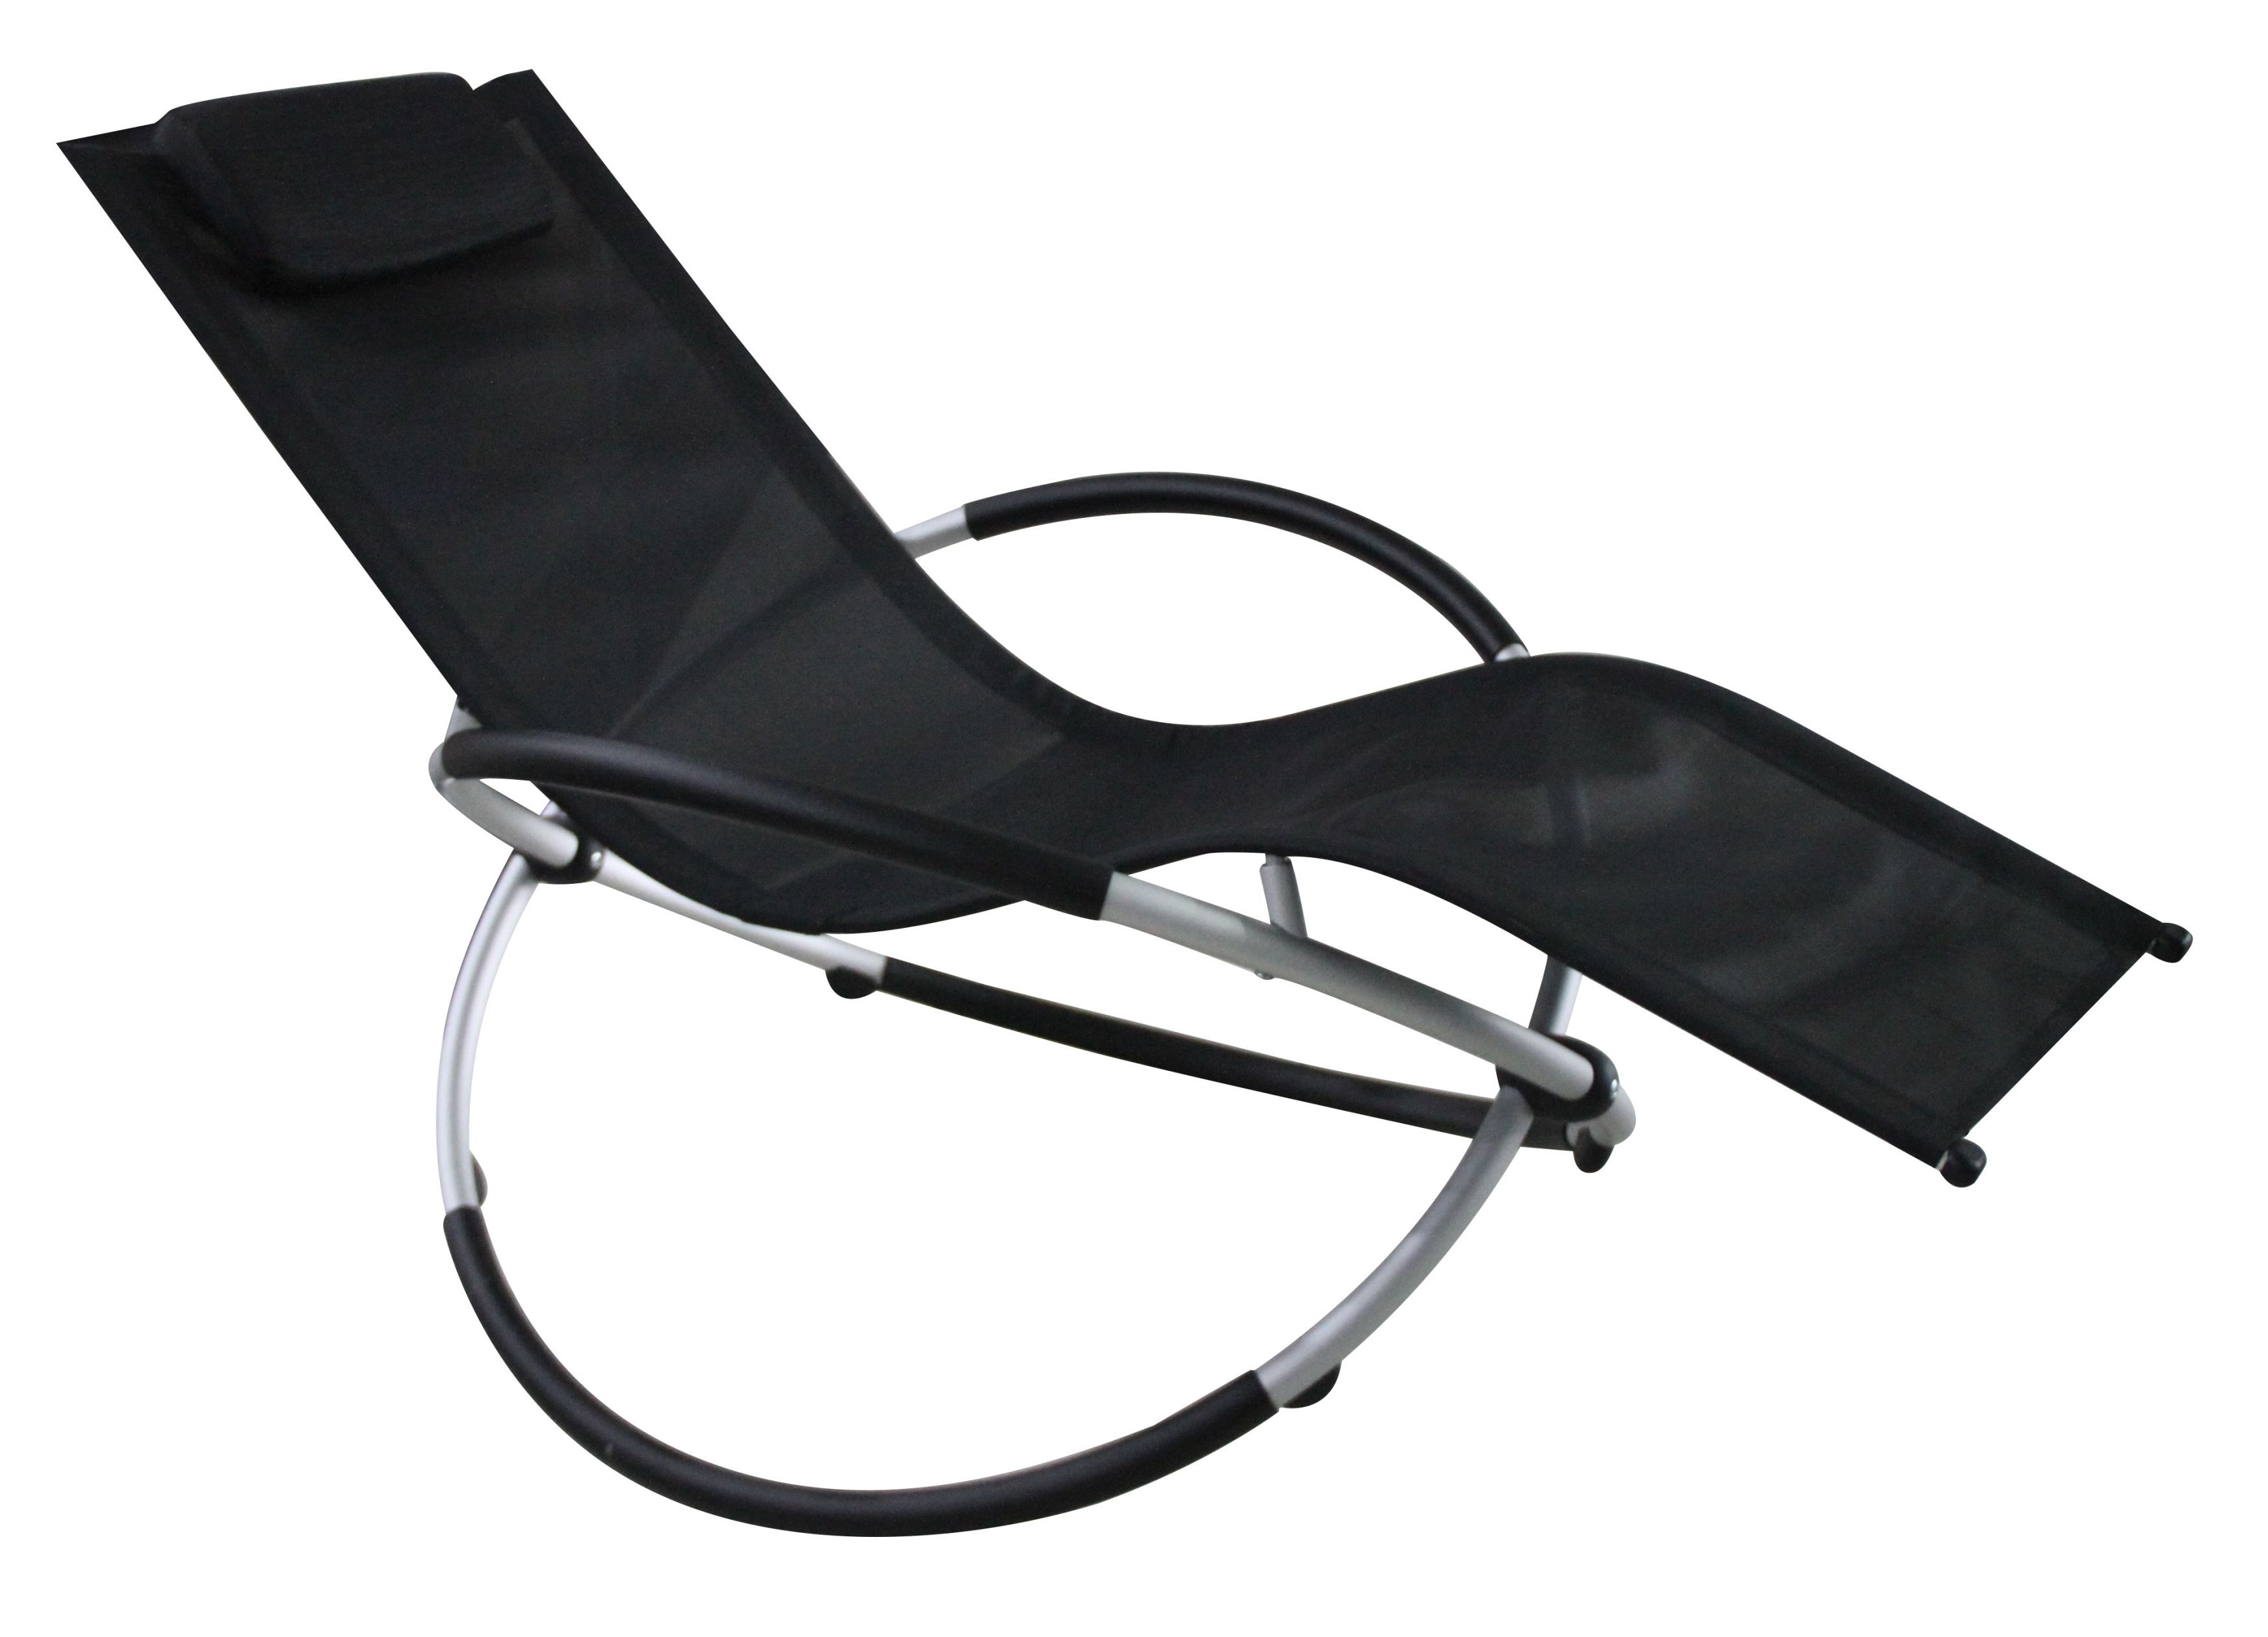 Vanilla Outdoor Orbit Rocking Lounge Chair Set/2 Black With Most Current Orbital Patio Lounger Rocking Chairs (View 16 of 25)